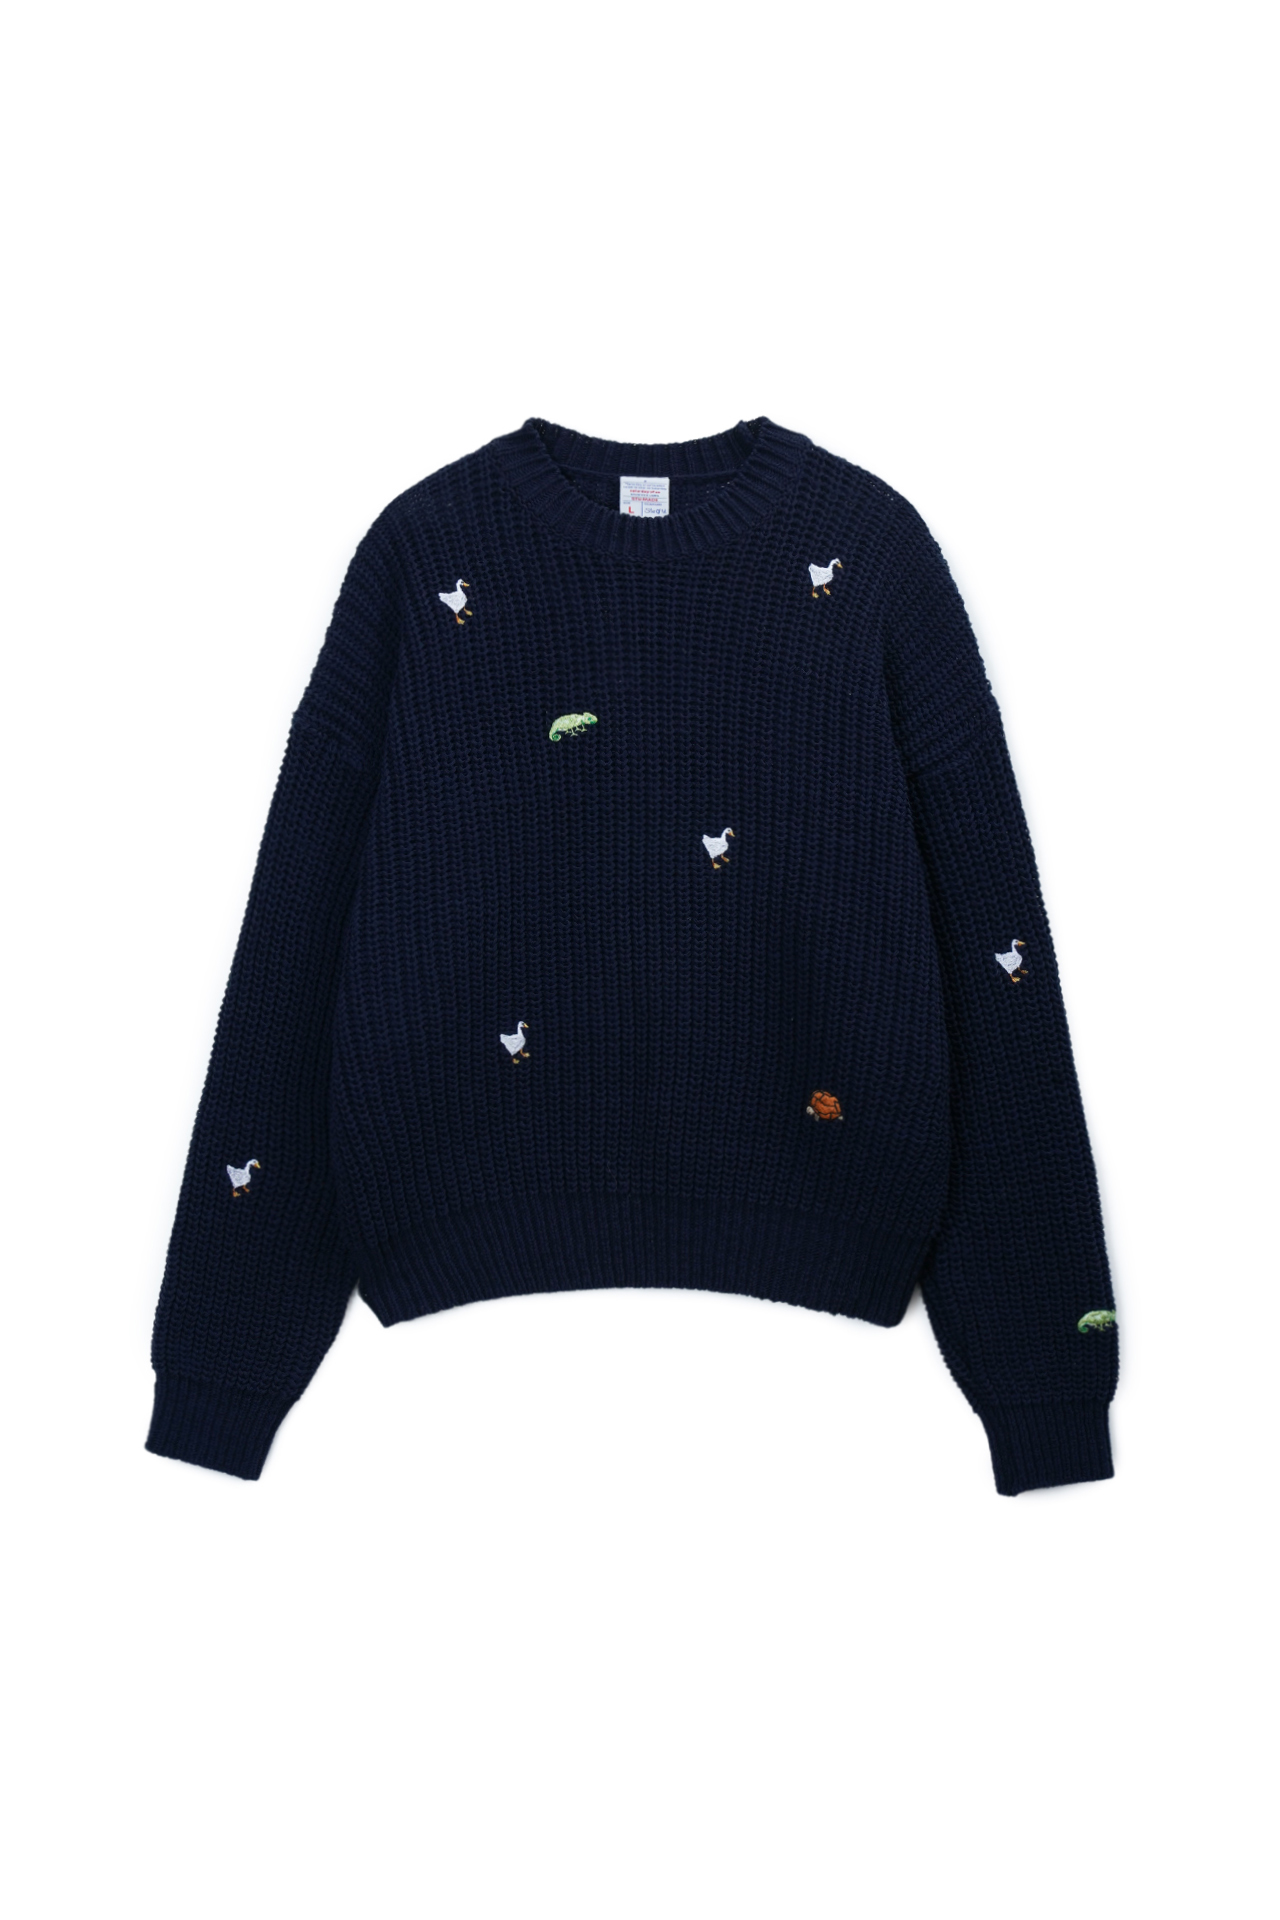 Animal Embroidered Knit Navy